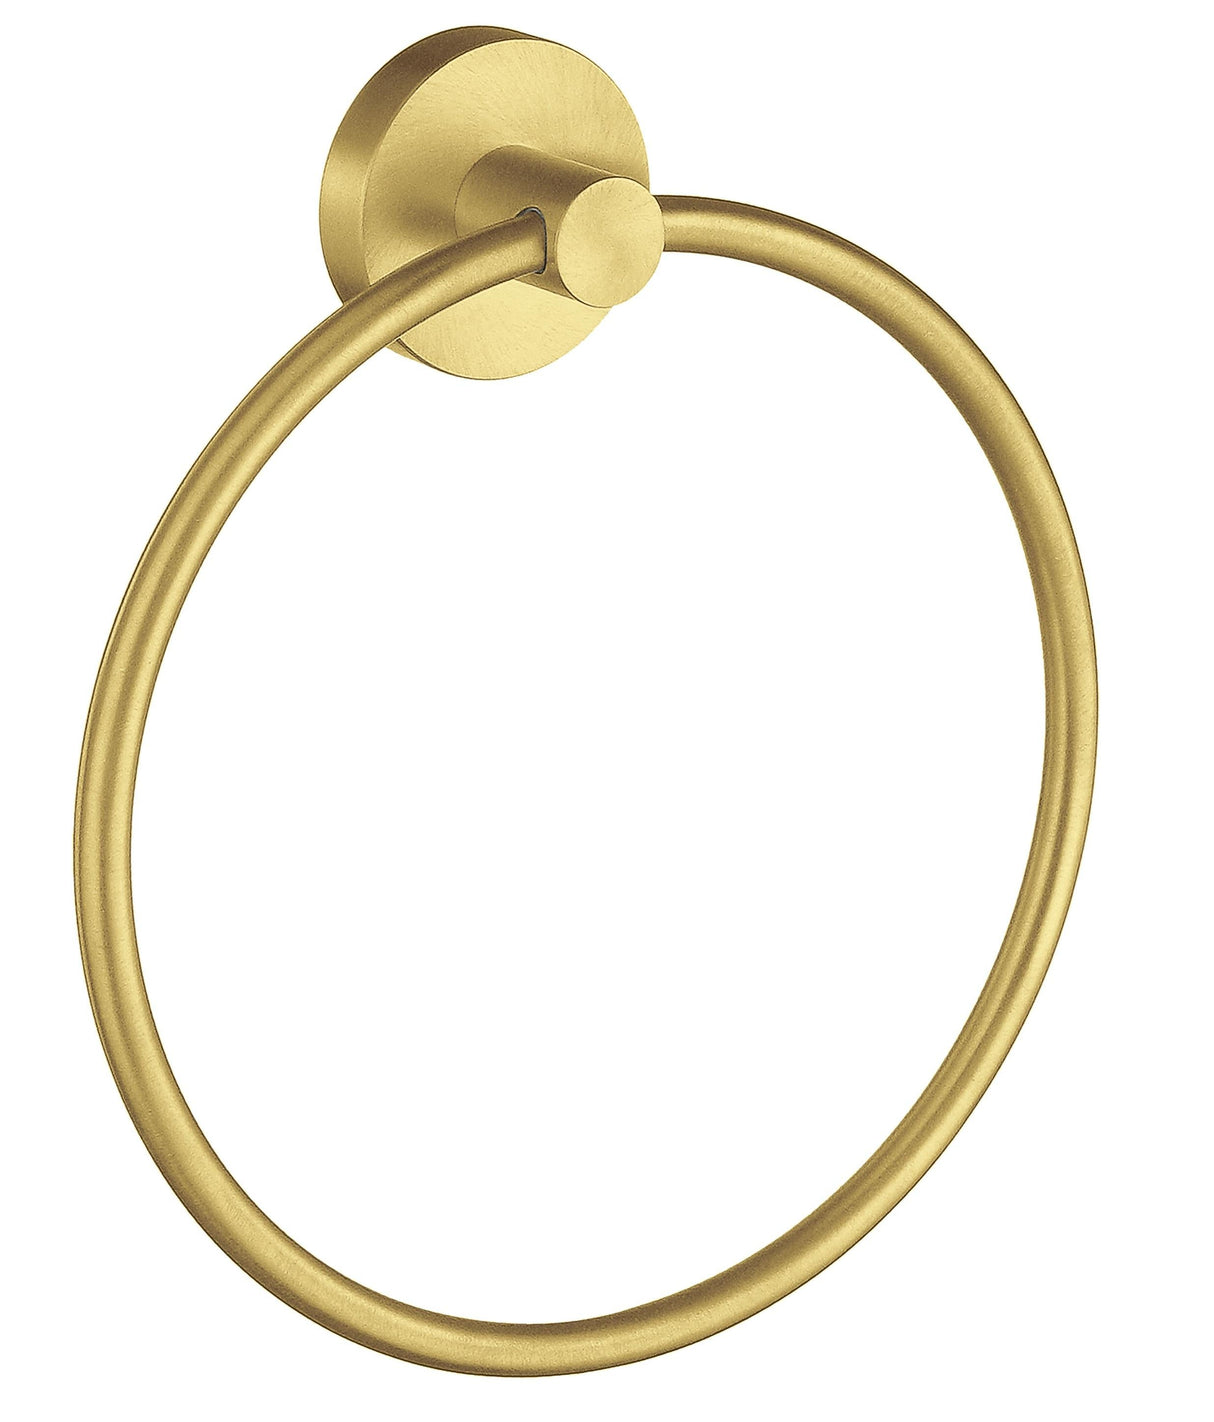 Smedbo Home Towel Ring in Brushed Brass